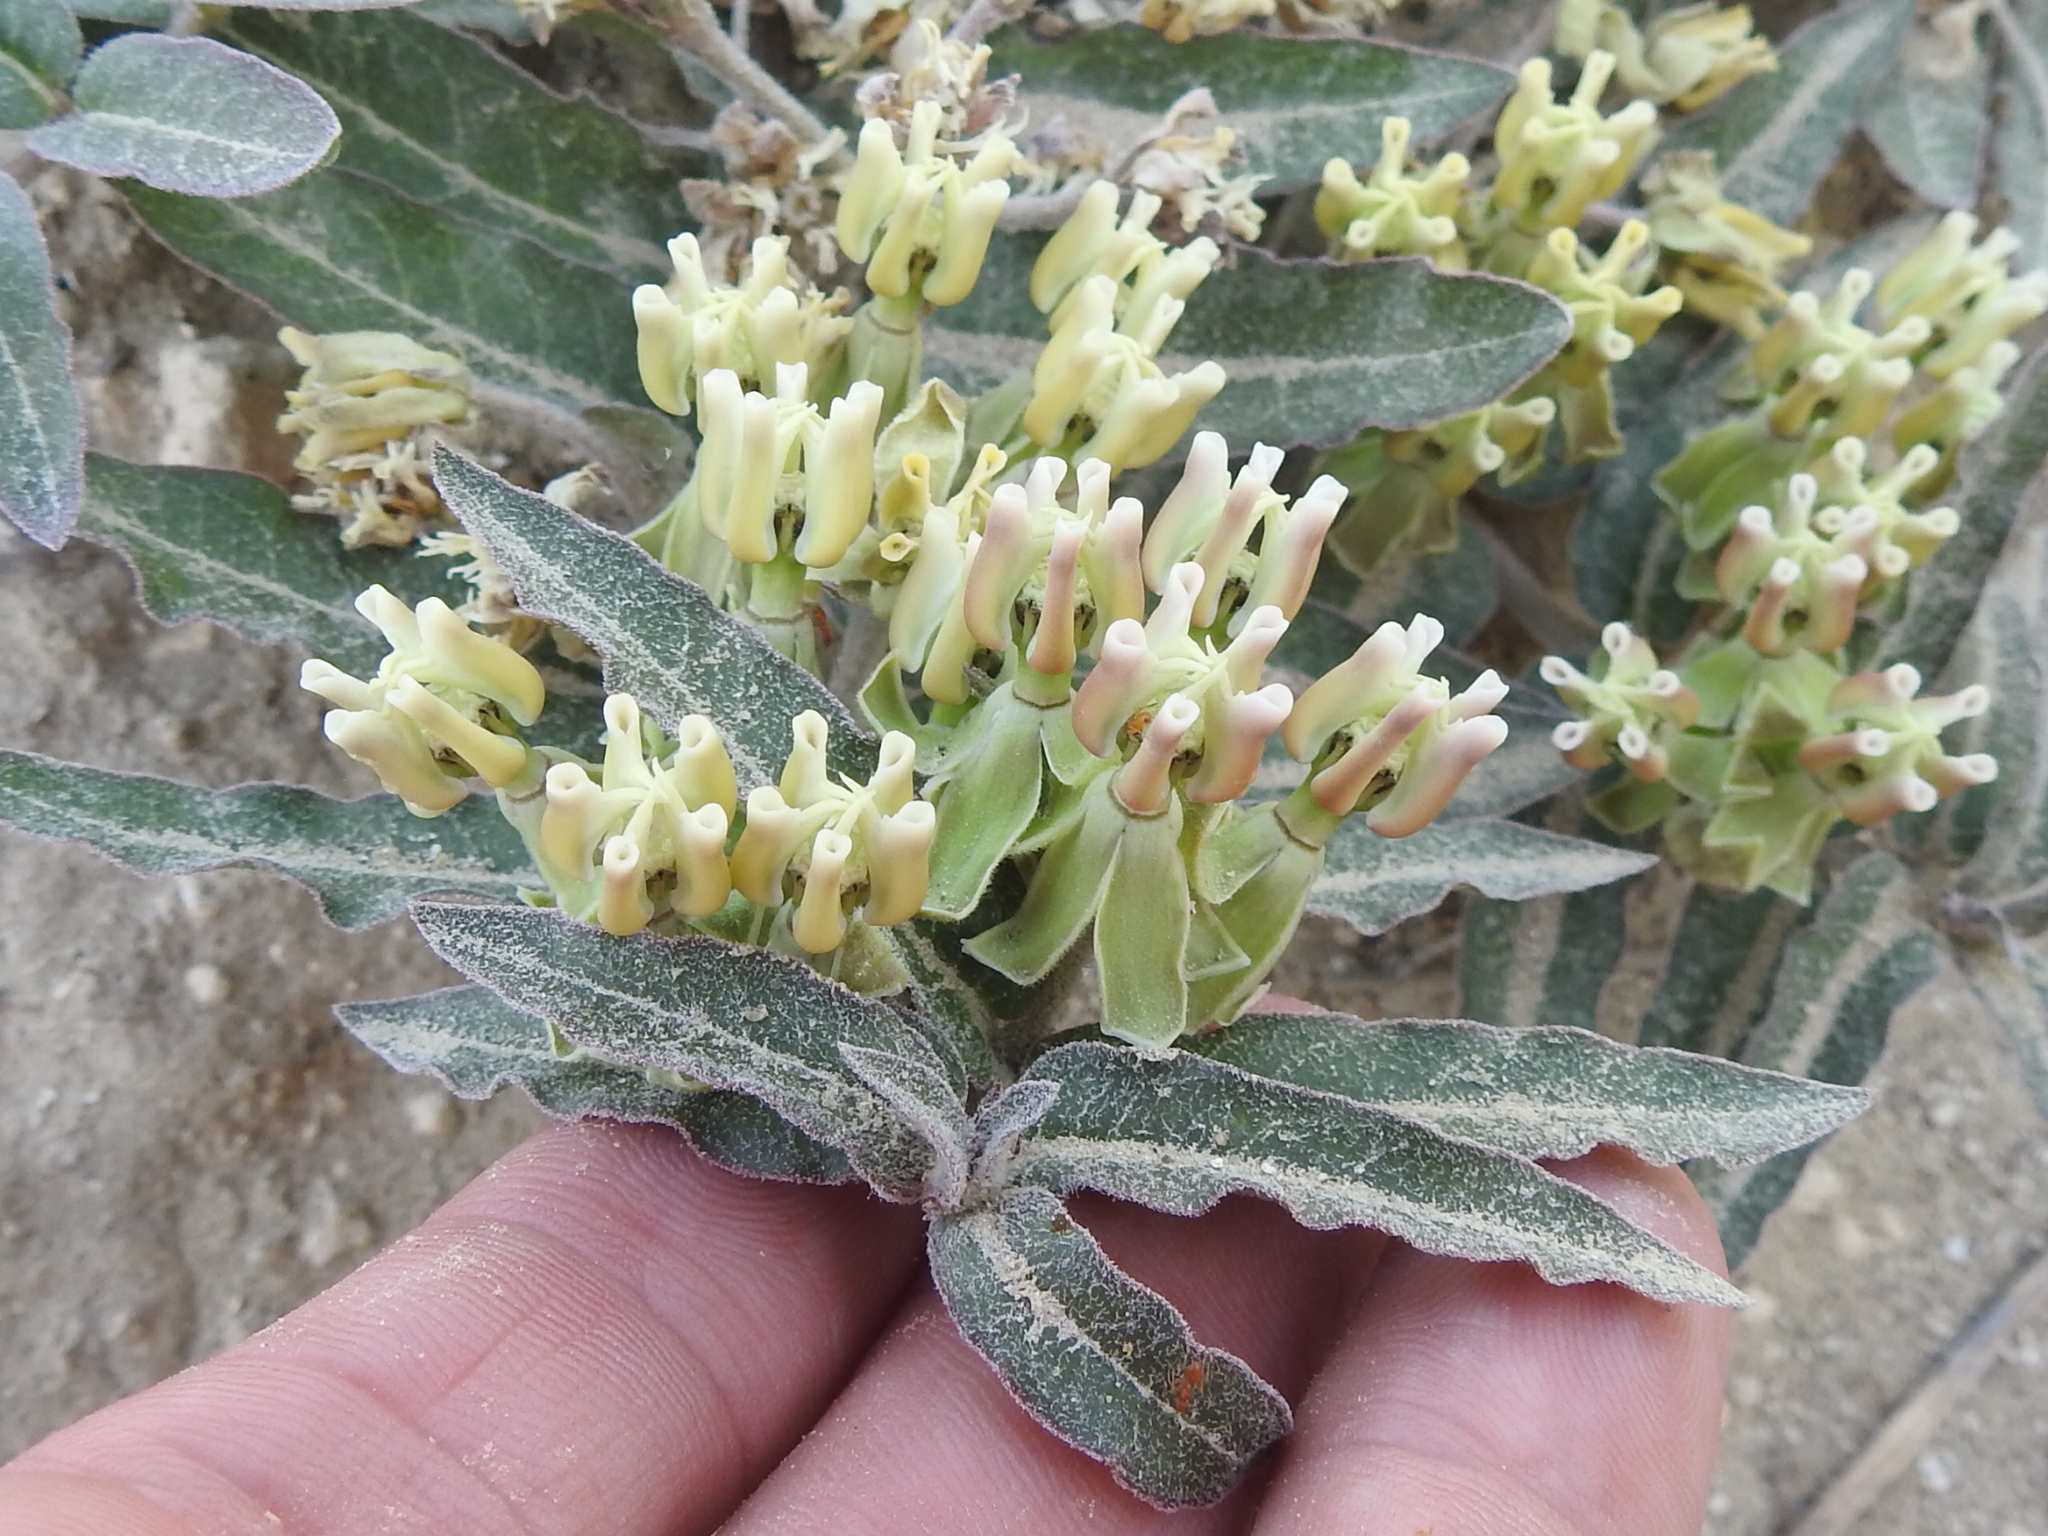 Texas milkweed listed as an endangered species by Fish and Wildlife Service